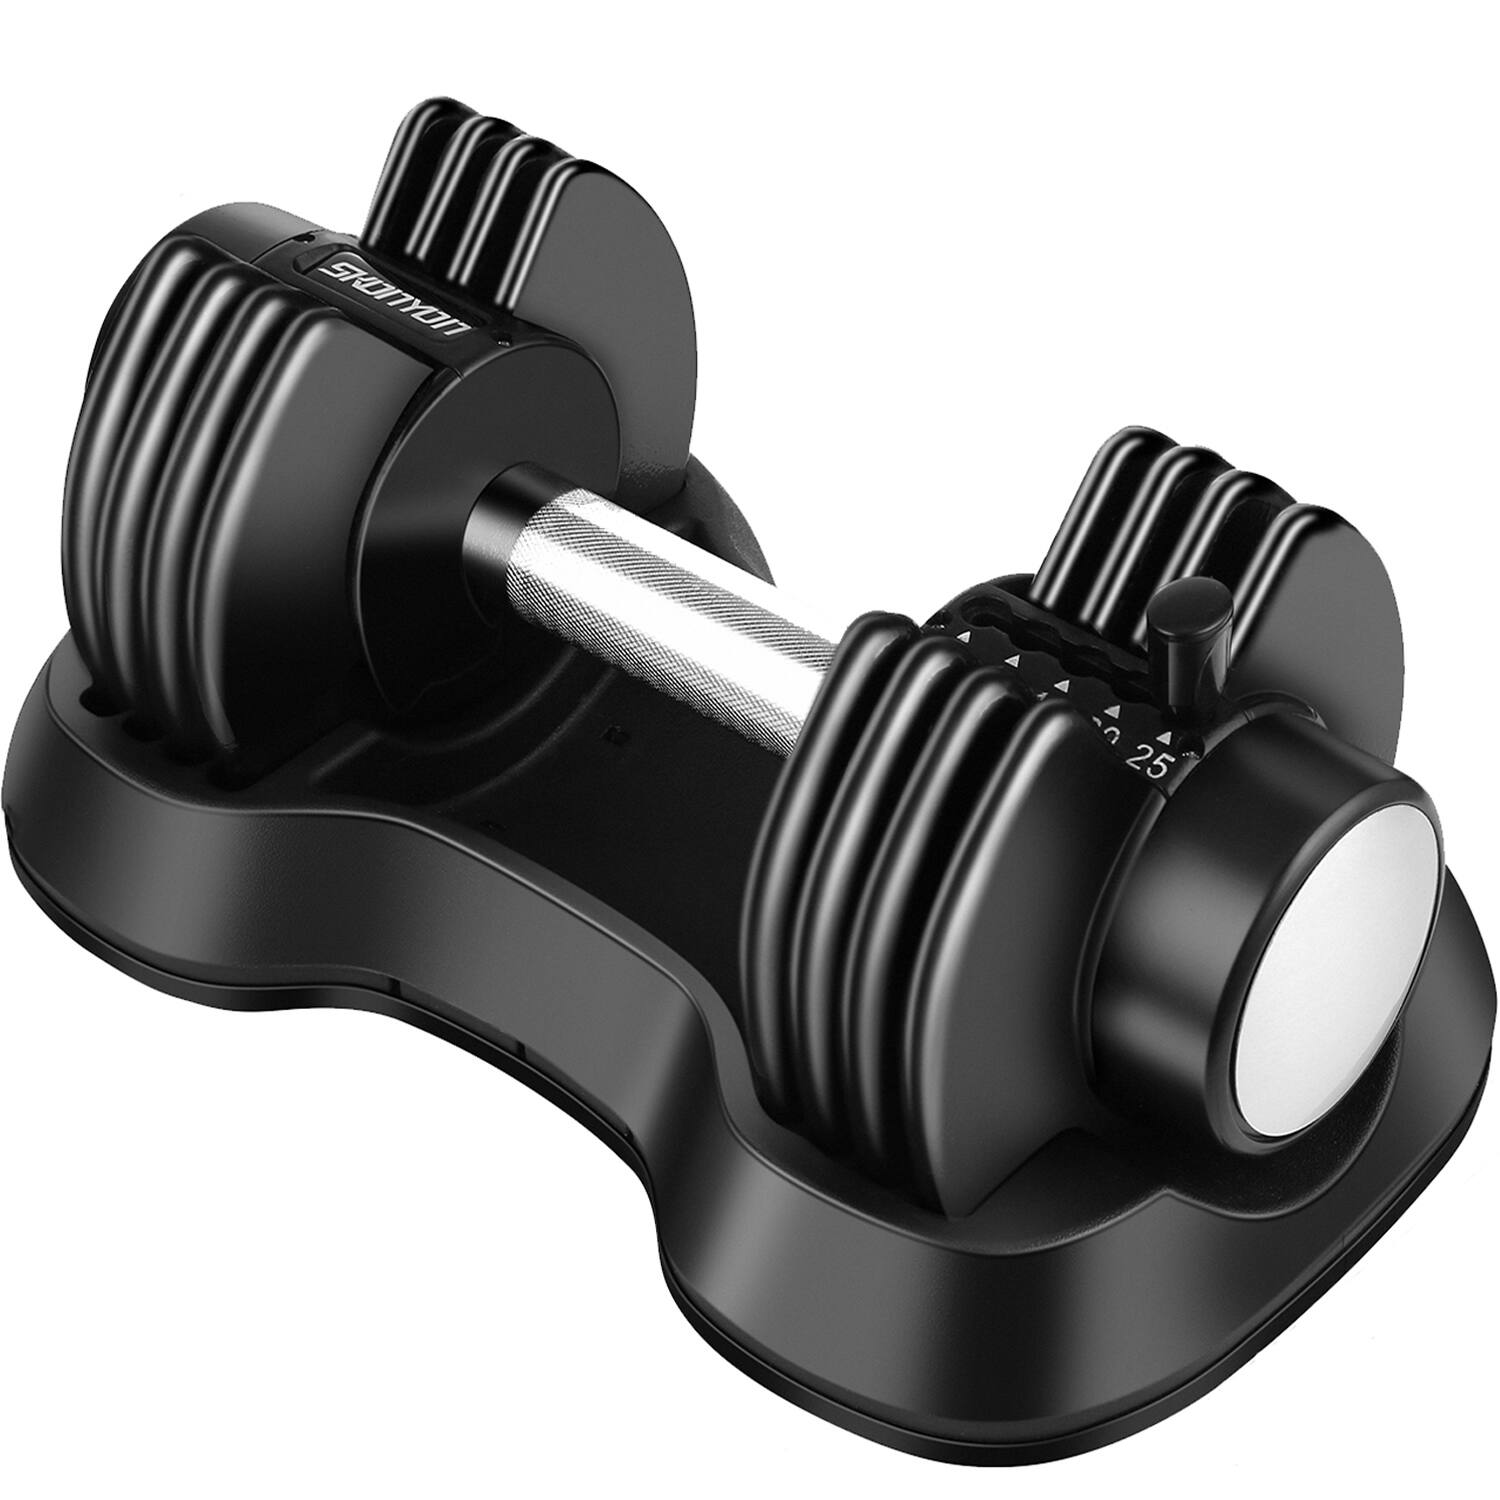 Adjustable Dumbbell Barbell 25 lbs Weight $79.97 with Free Shipping